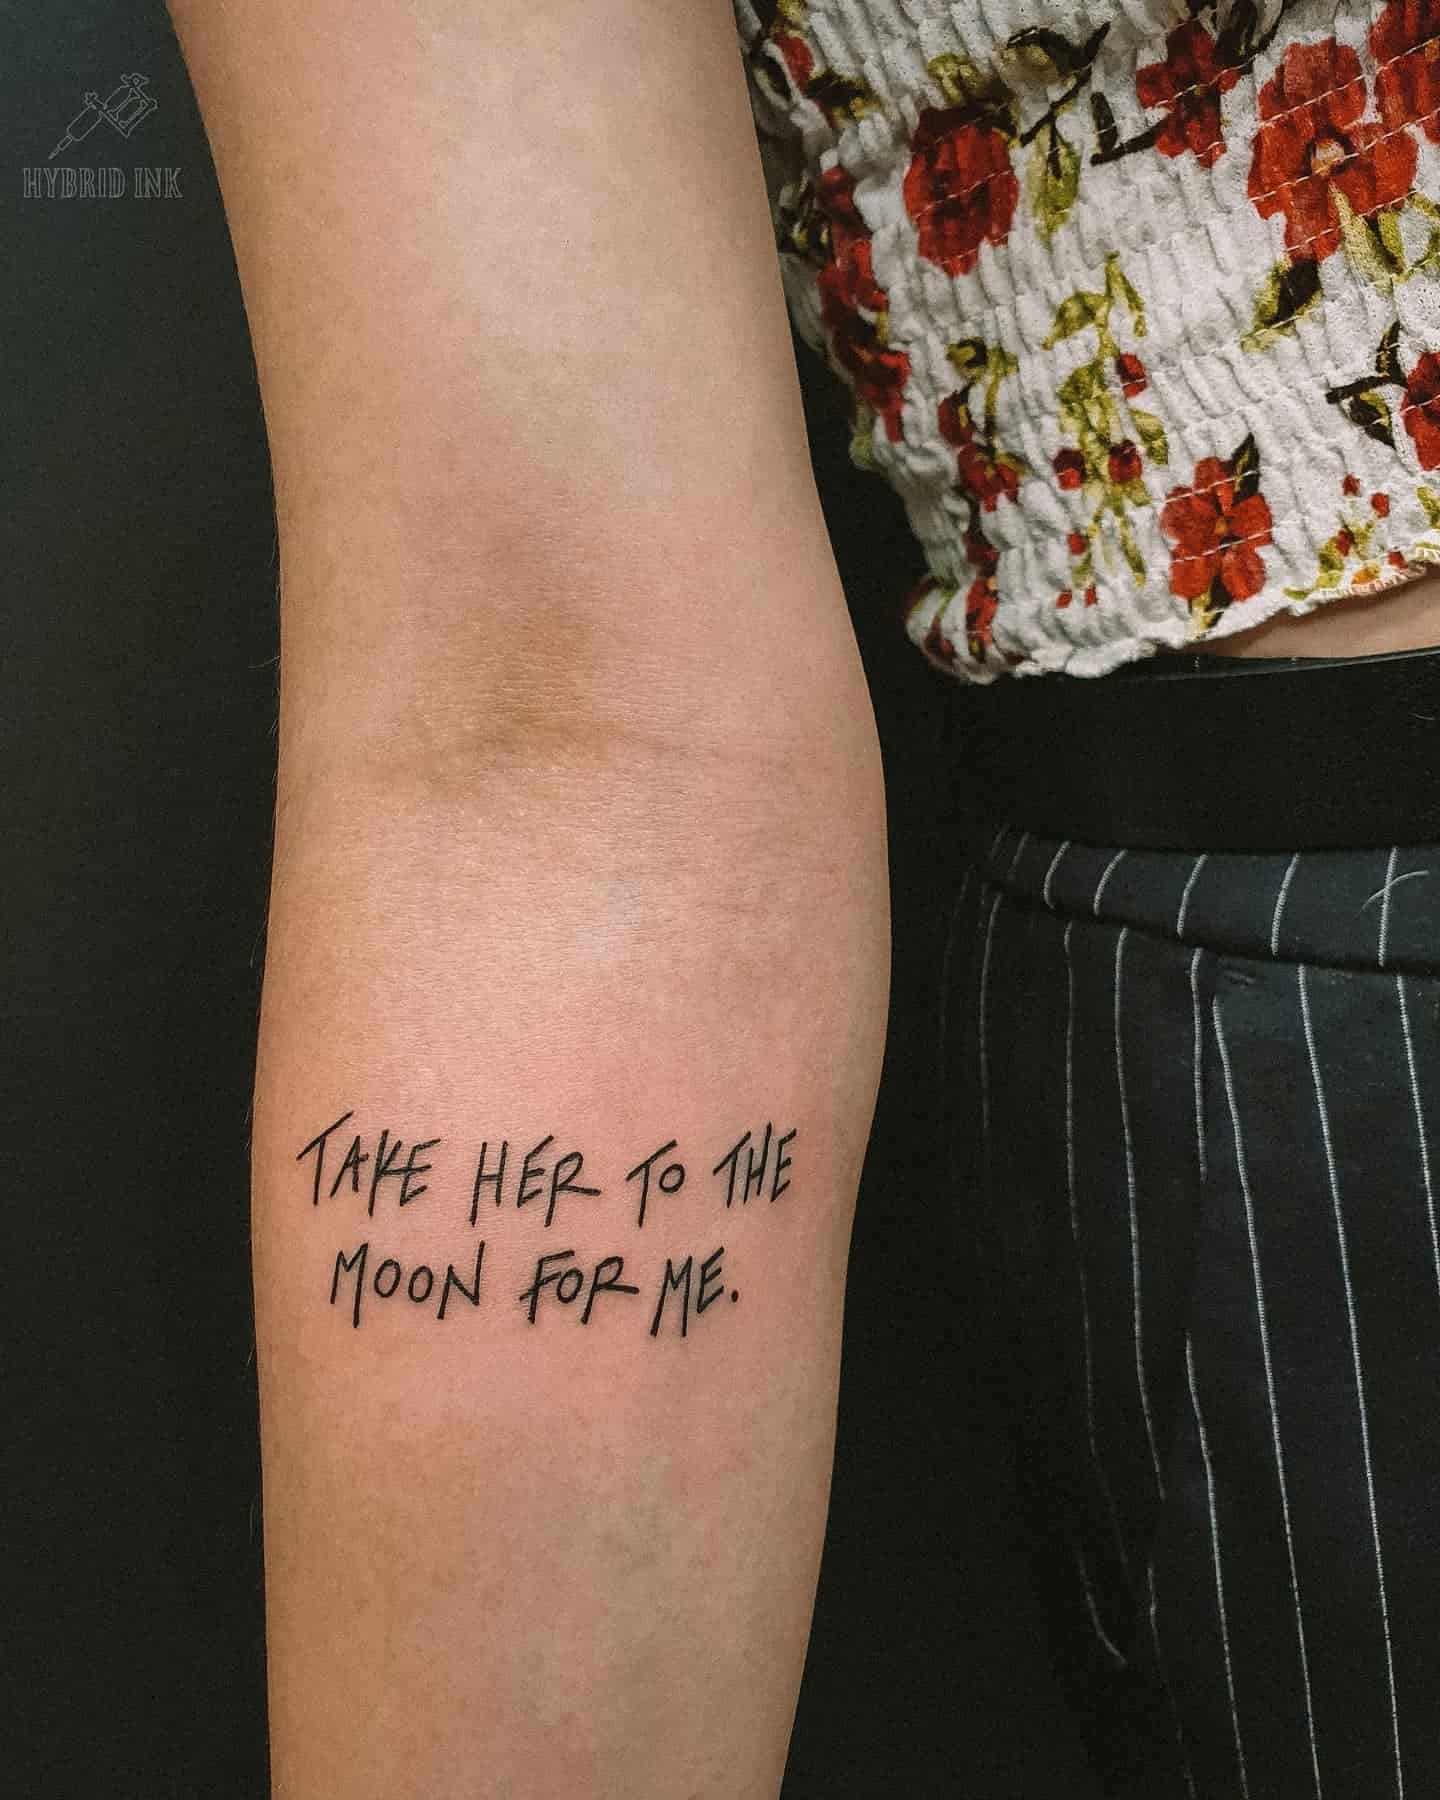 40 Inspiration for Quote Tattoos Whats Your Favorite  Saved Tattoo